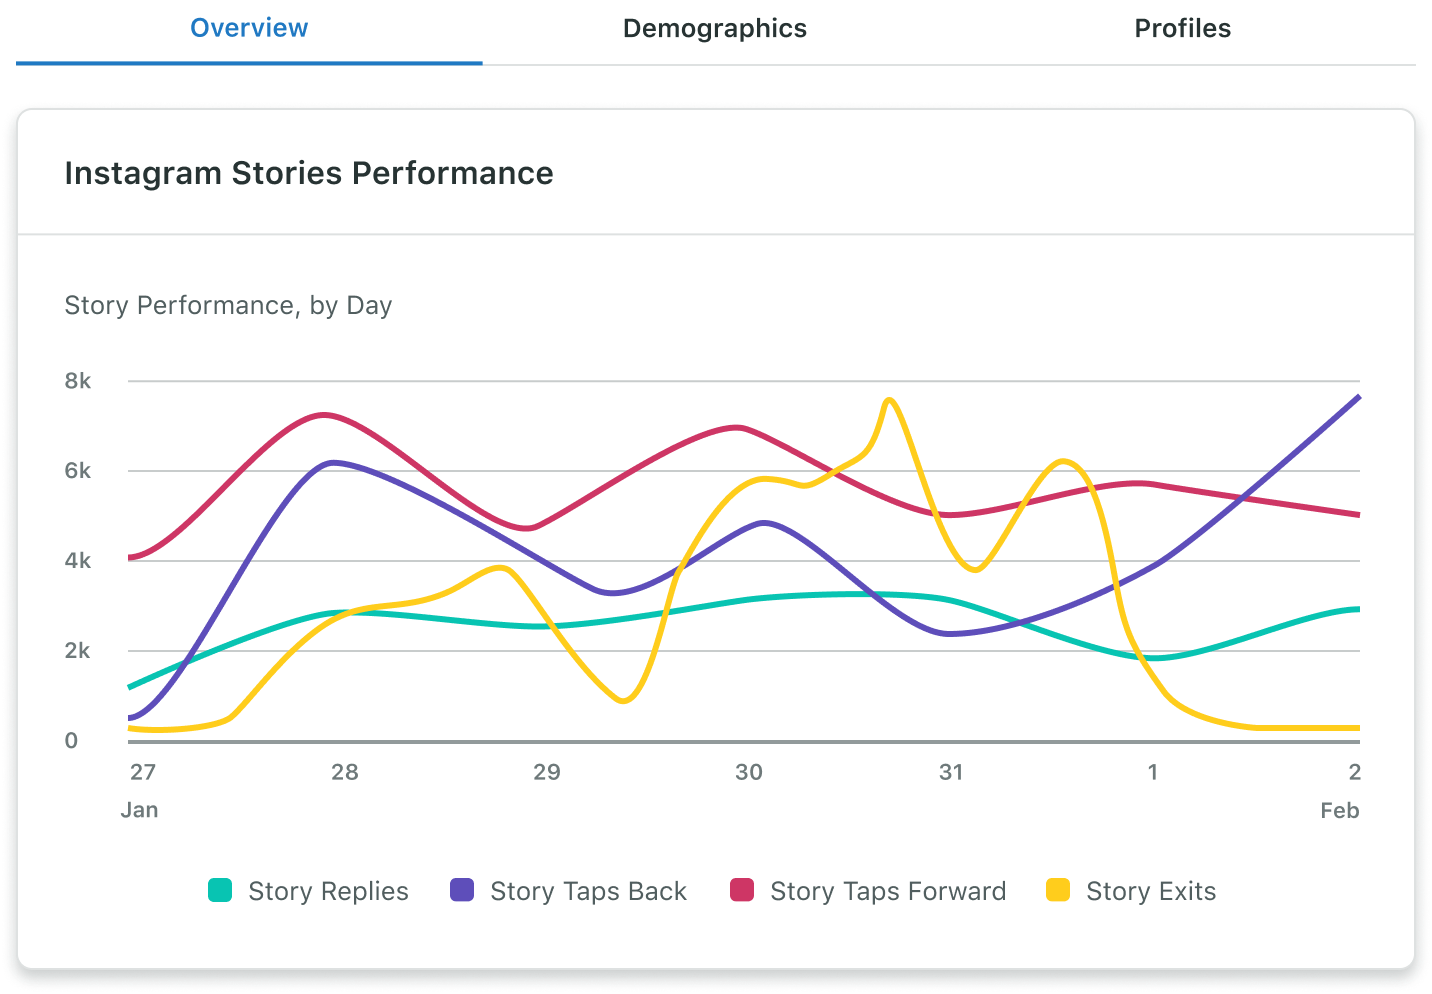 Sprout’s Instagram Business Profiles Report includes daily stories performance data, like replies, taps back, taps forward and exits in a selected date range.